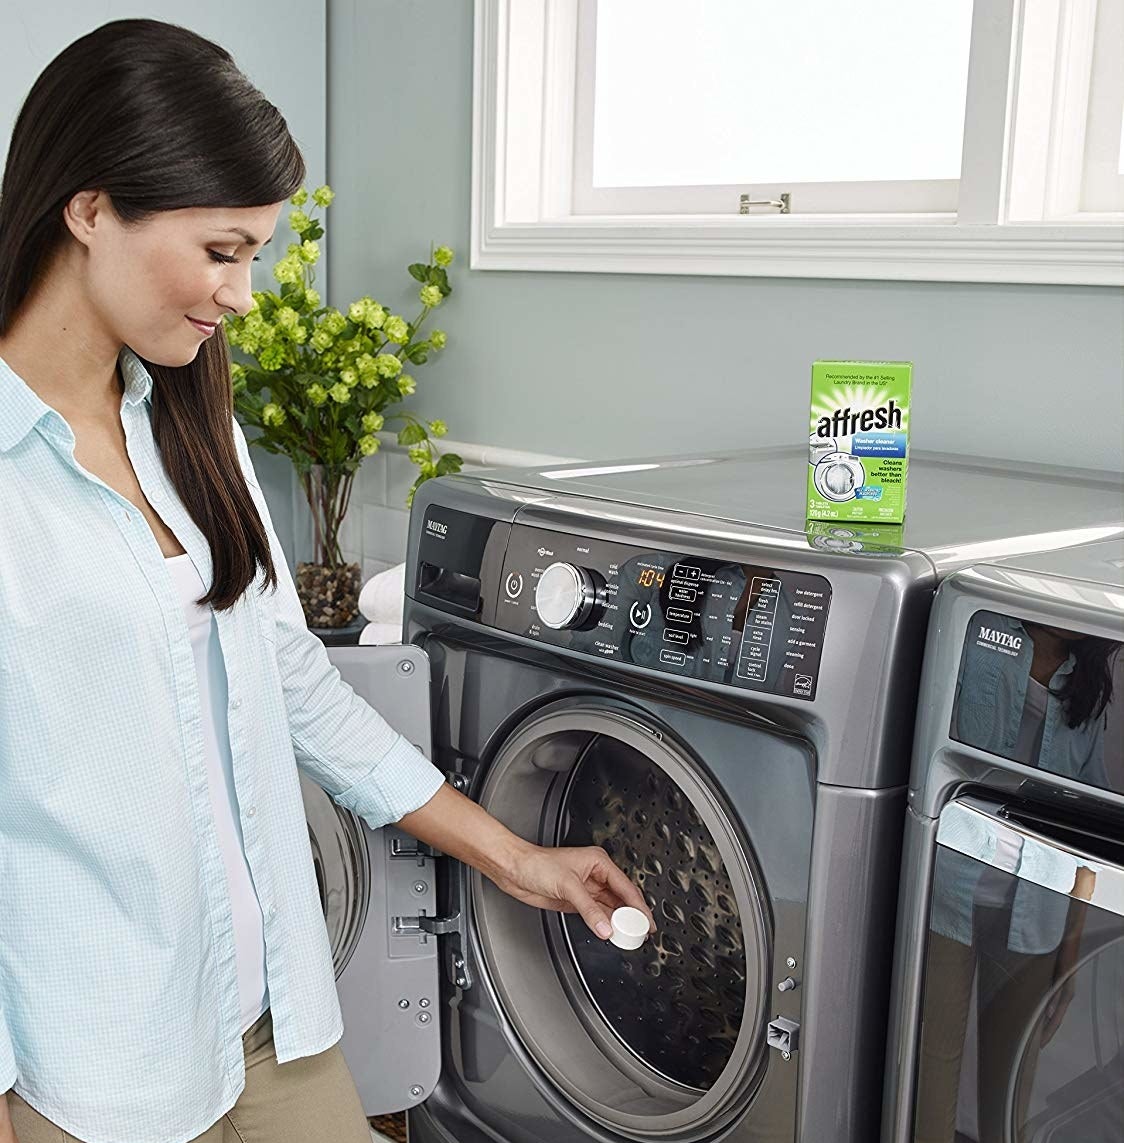 A person placing a small detergent pod into their washing machine